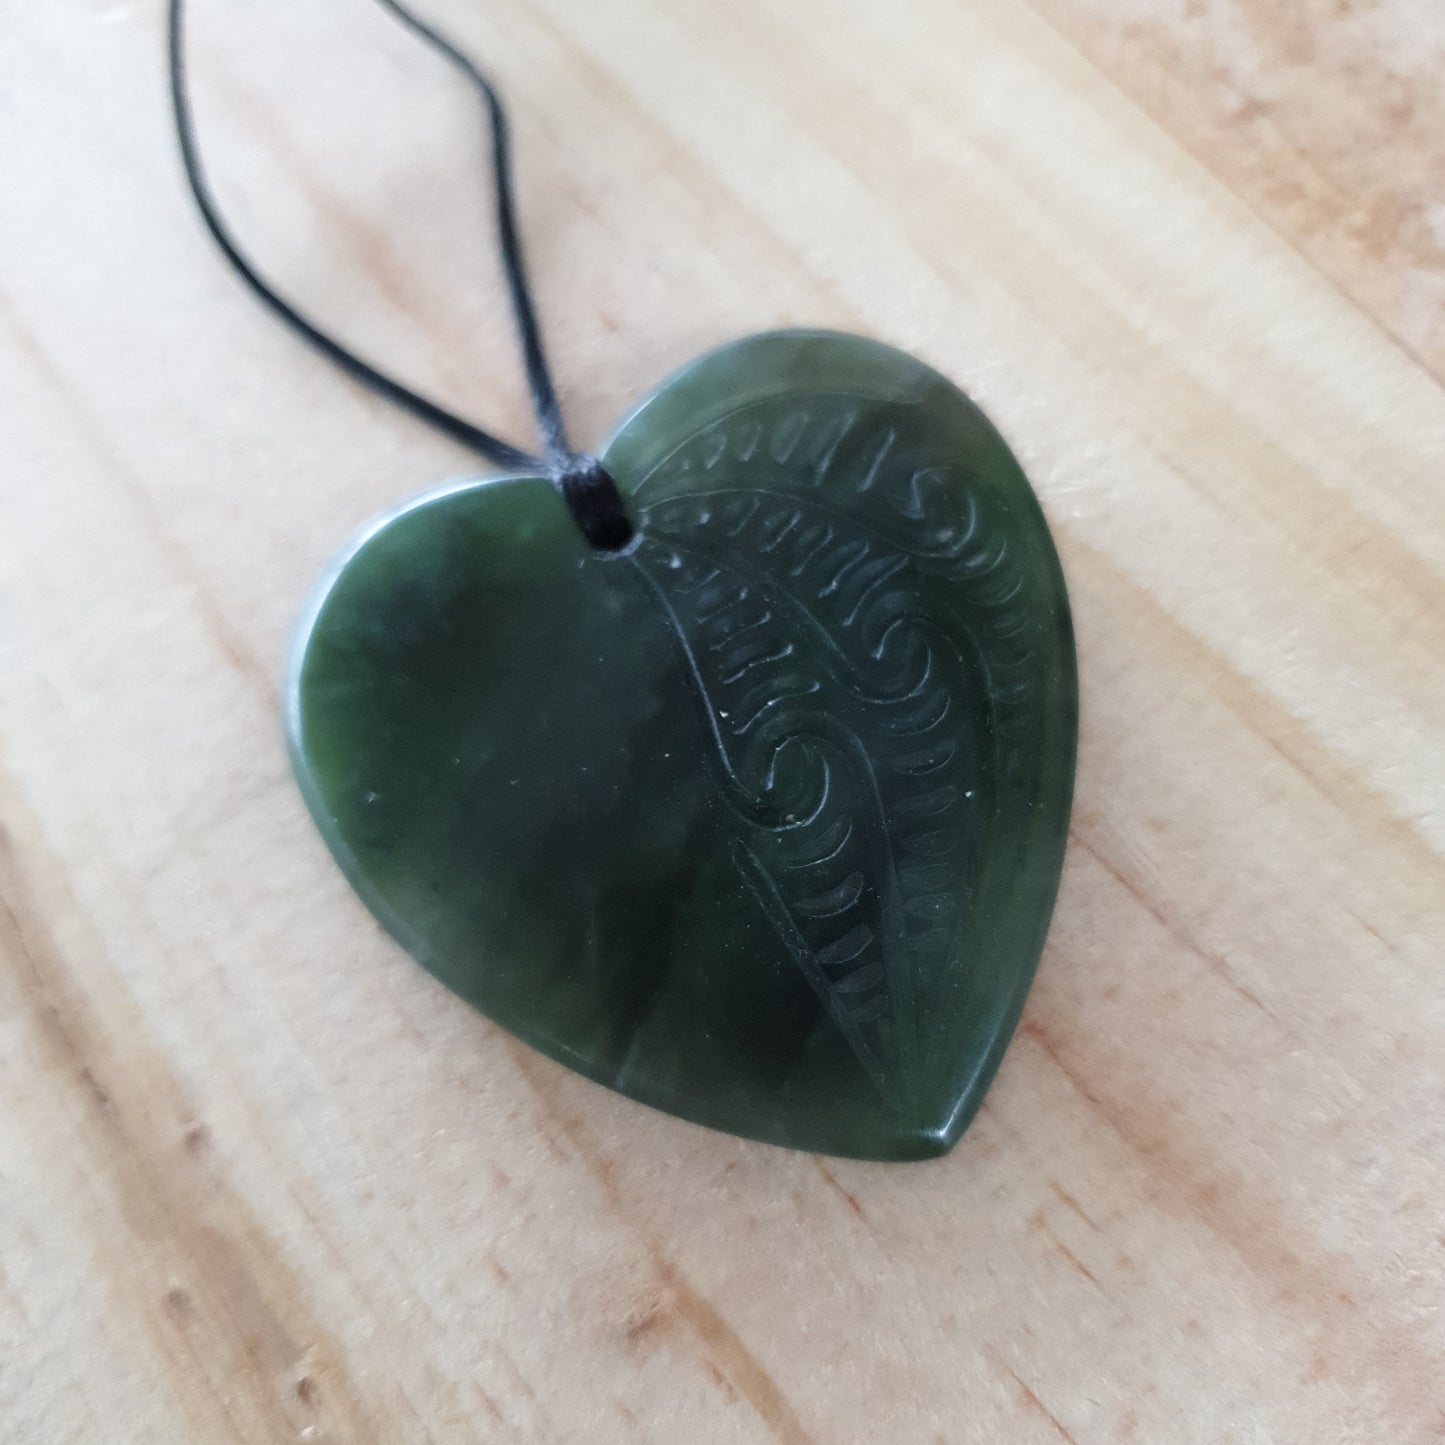 Greenstone Pendant with Carved Detail - Large - Rivendell Shop